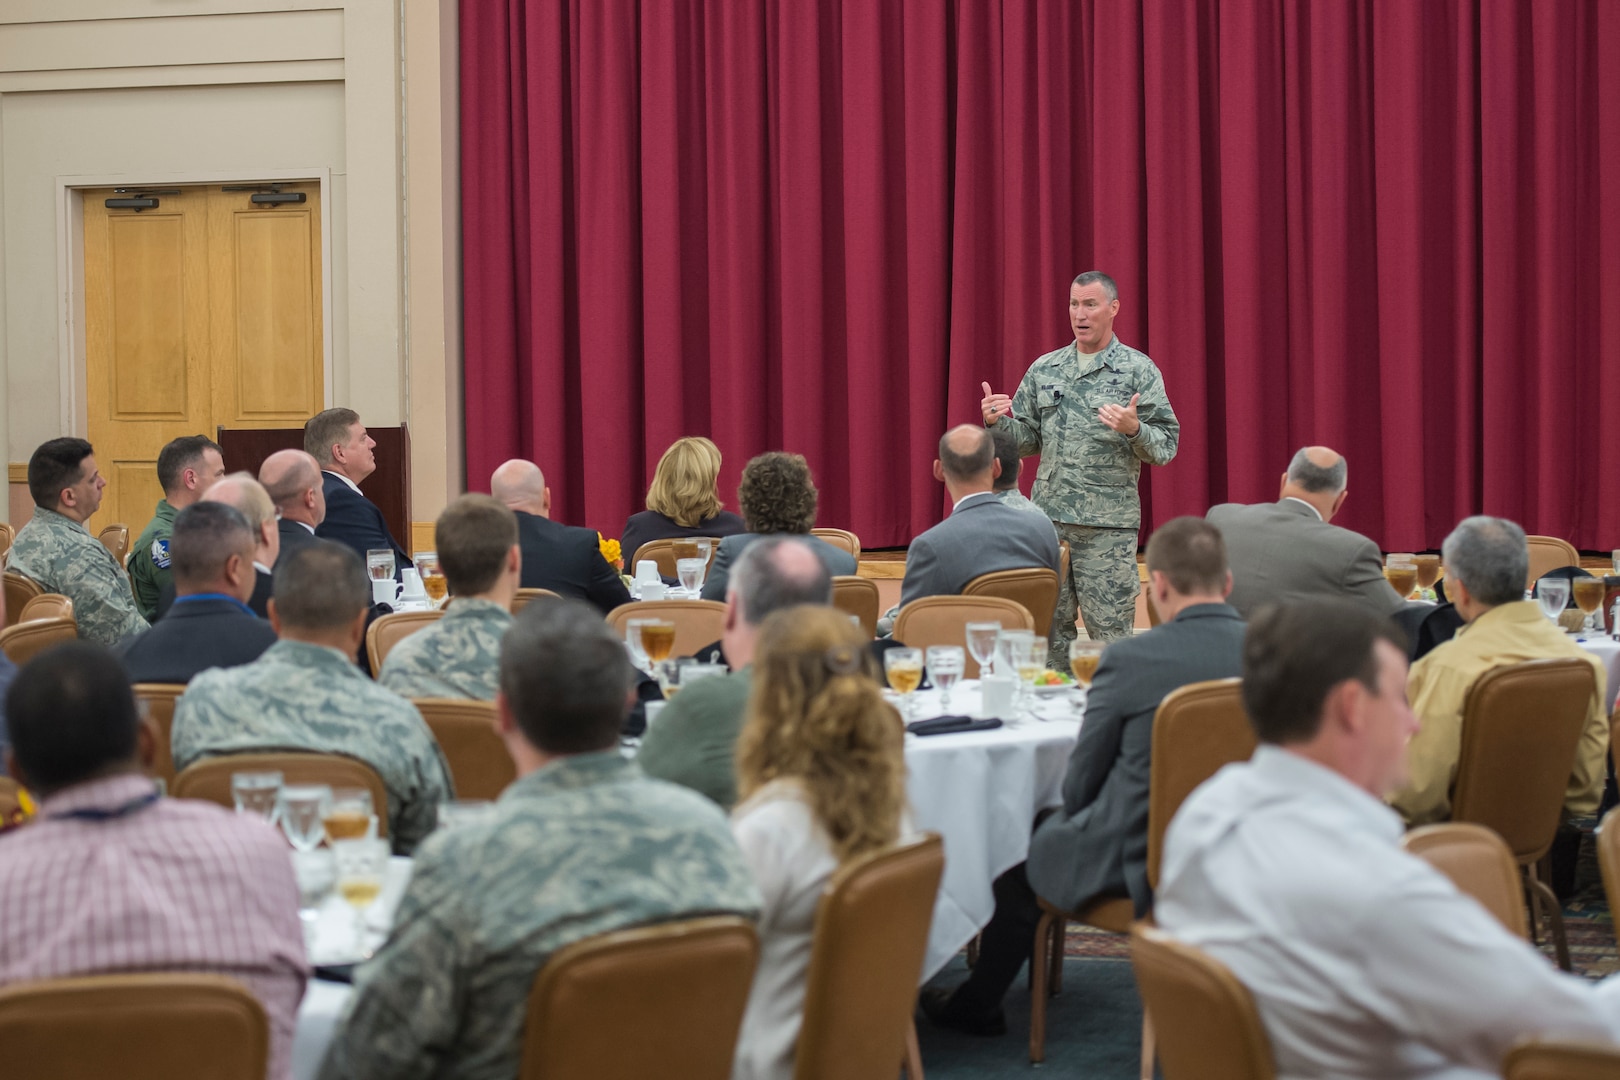 Maj. Gen. Ed Wilson, 24th Air Force commander speaks to attendees of the 2015 AF Cyberspace Live, Virtual and Constructive (LVC) Workshop on Joint Base San Antonio - Lackland, Texas, October 20. The three-day LVC workshop is co-chaired by 24 AF and the Air Force Agency for Modeling and Simulation (AFAMS). The theme of the workshop is "Training the Cyber Mission Force." As the leader in realistic Cyber training, the AF seeks to integrate air, space, and cyberspace training through its full-spectrum LVC capabilities. (U.S. Air Force photo by Master Sgt. Luke P. Thelen/Released)
